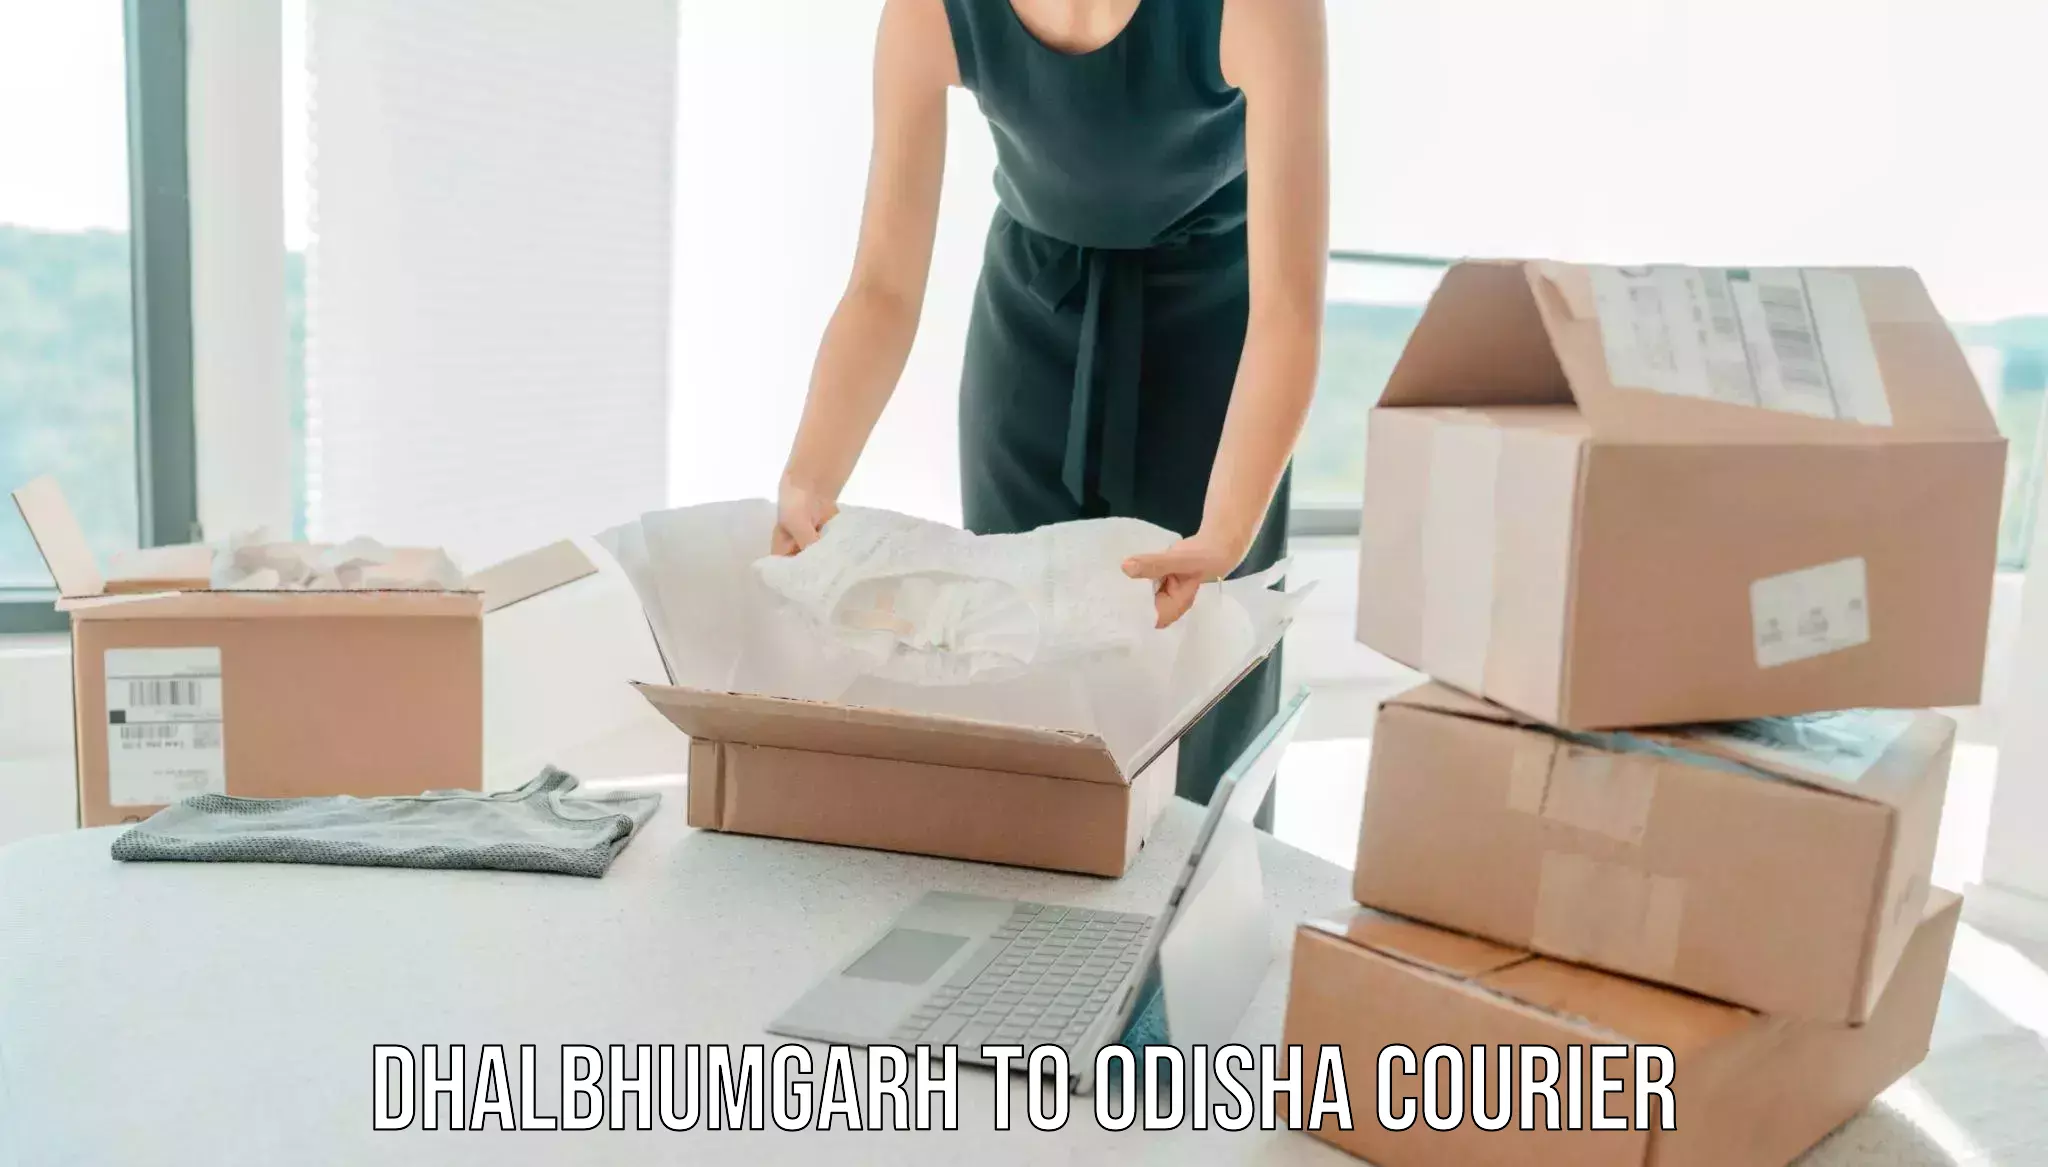 Quality relocation services in Dhalbhumgarh to Dhenkanal